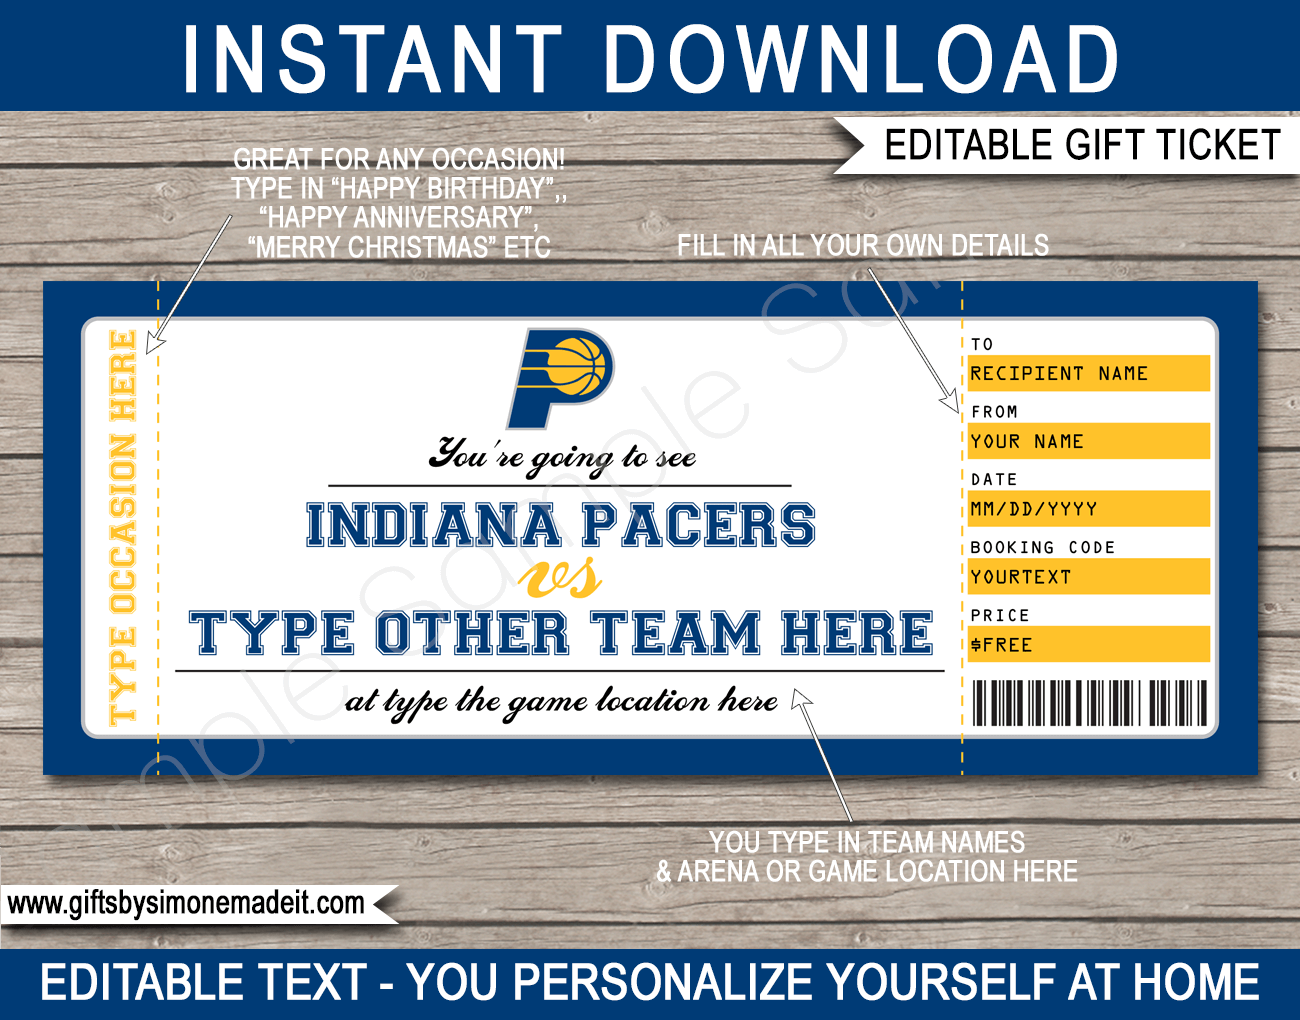 Indiana Pacers Game Ticket Gift Voucher Printable Surprise NBA